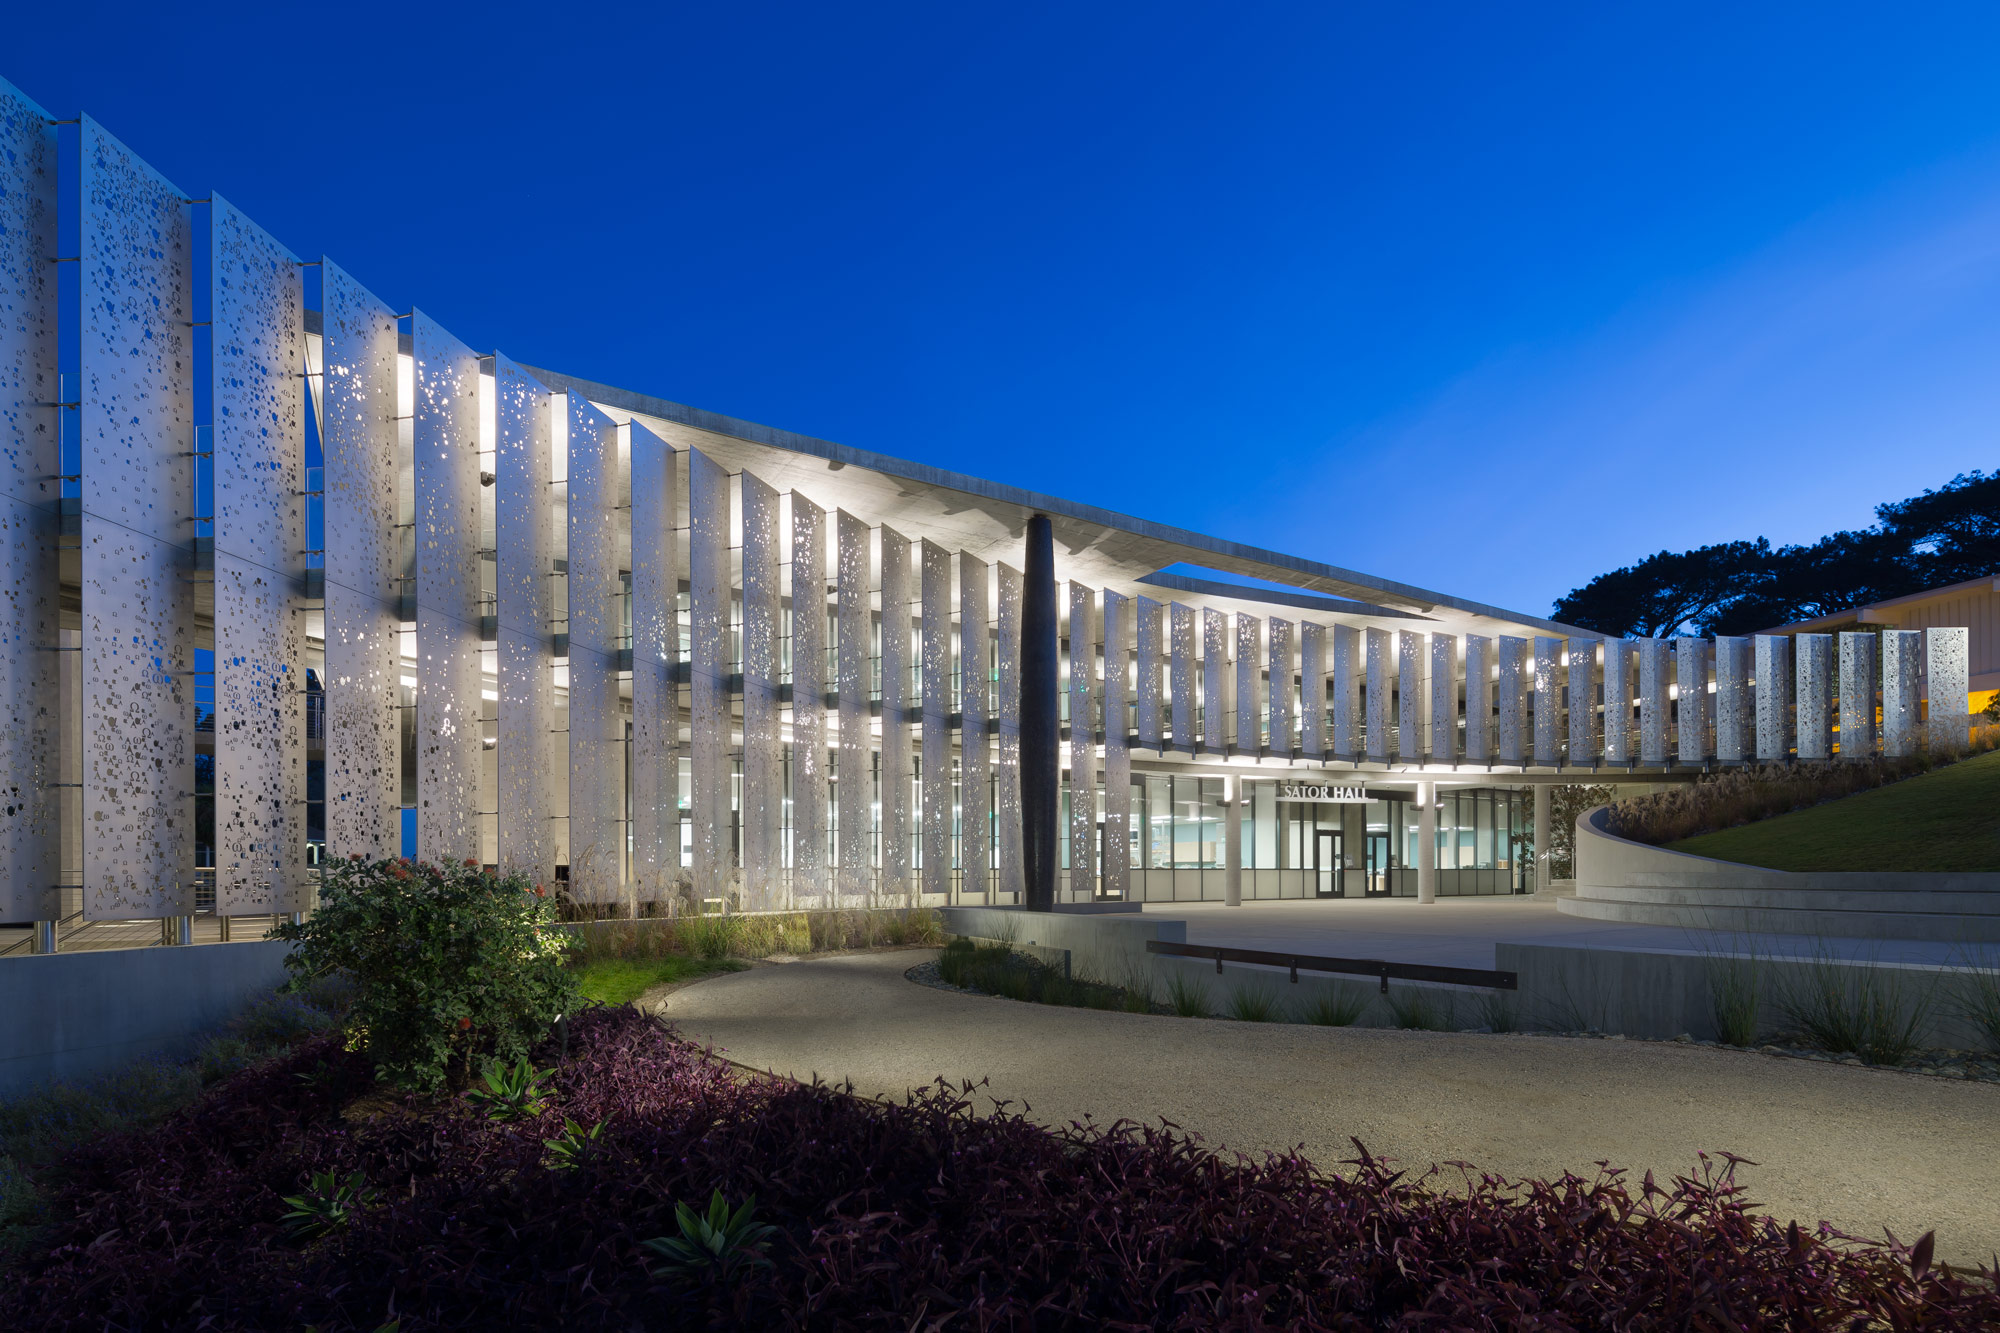 The curved stainless-steel facade of Carrier Johnson + Culture’s Point Loma Nazarene University in San Diego lets in light but deflects solar heat. (Courtesy Carrier Johnson + Culture)